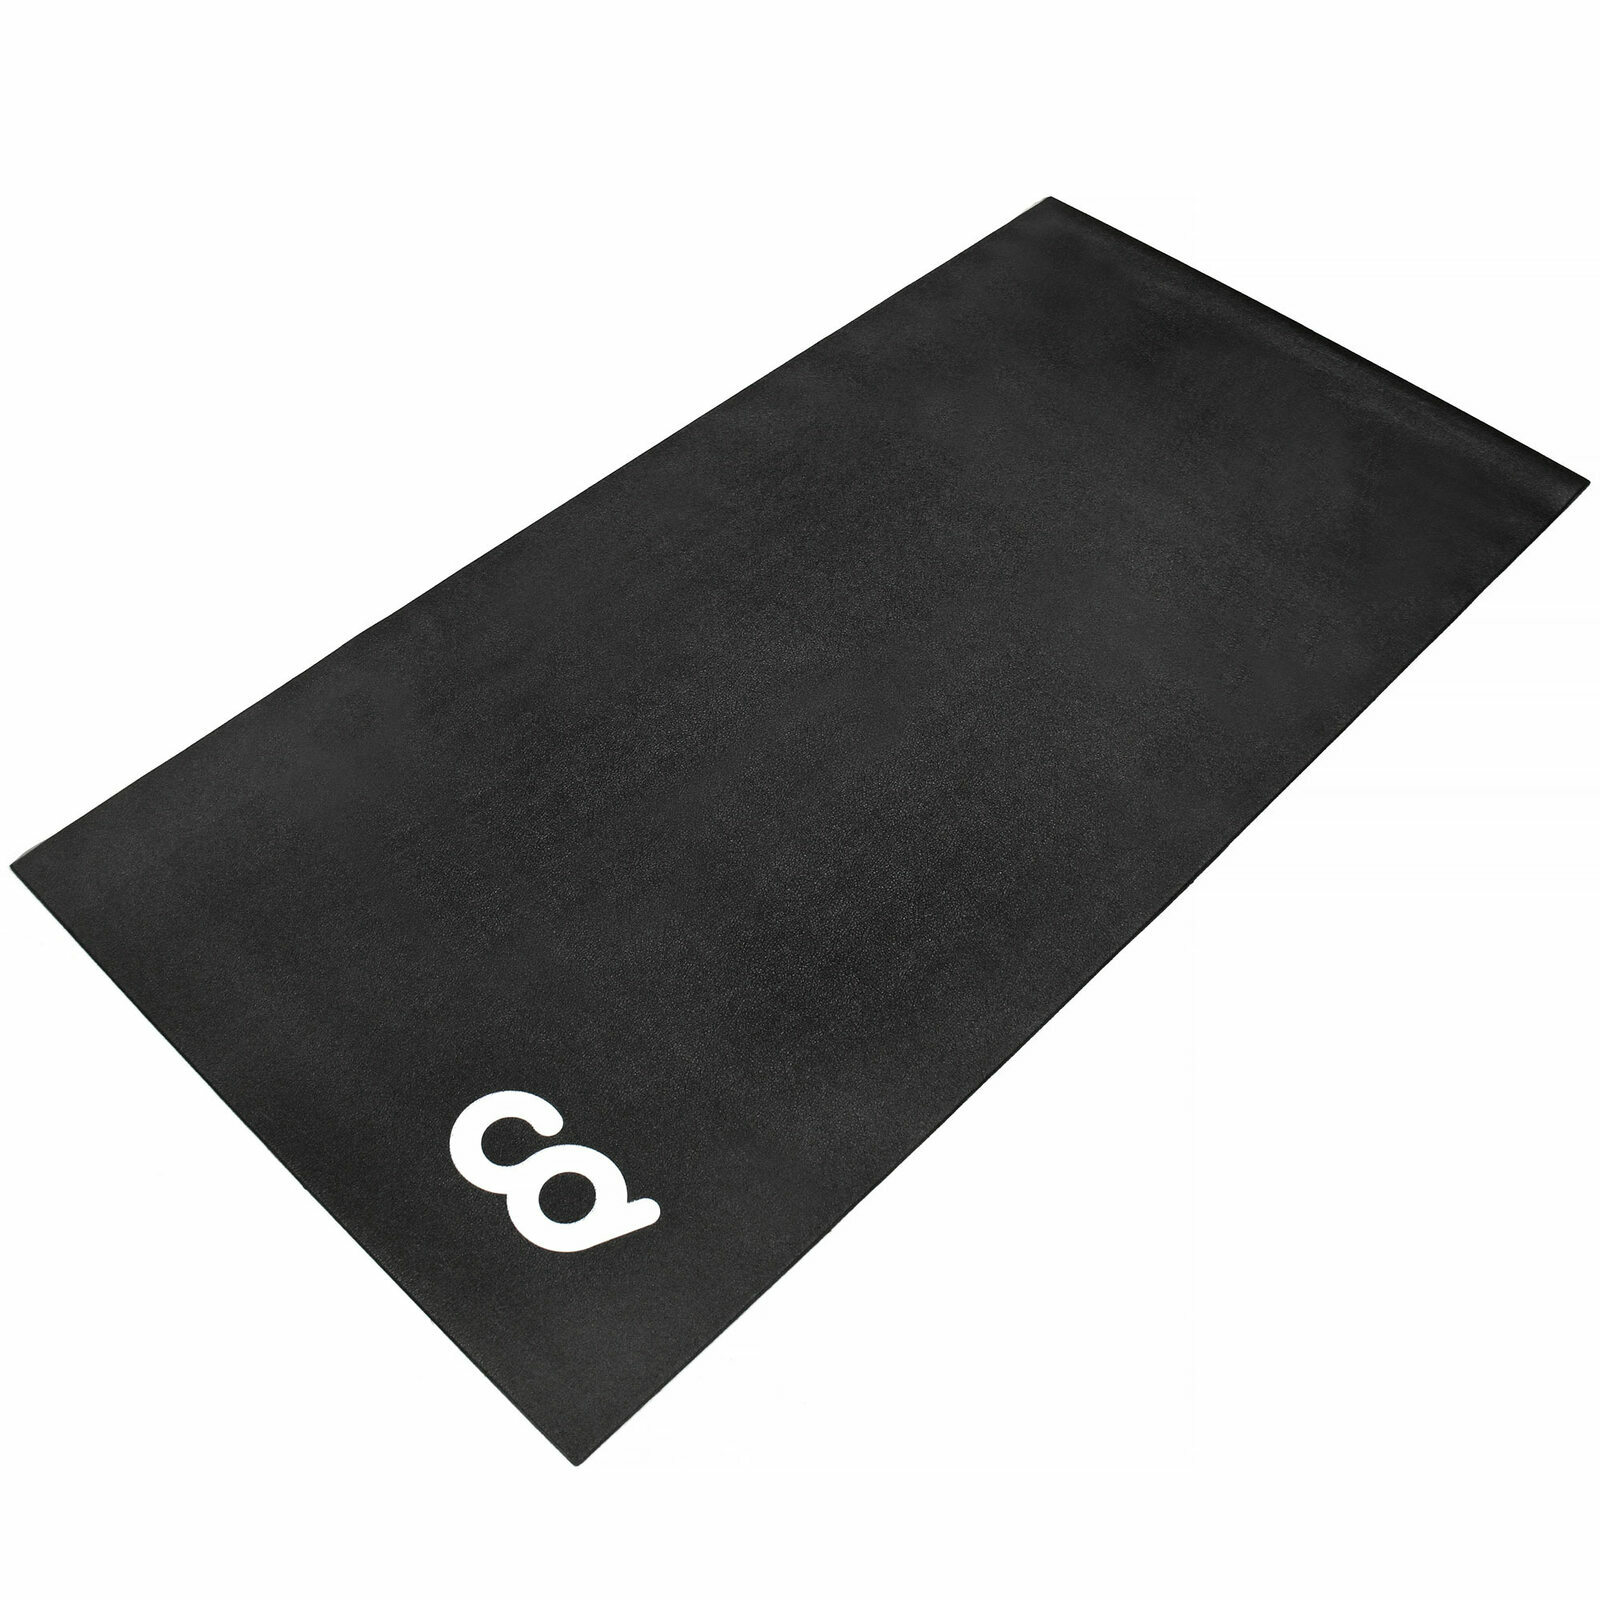 Bicycle Trainer Floor High Density Exercise Spin Bike Mat (30-inch x 72-inch)